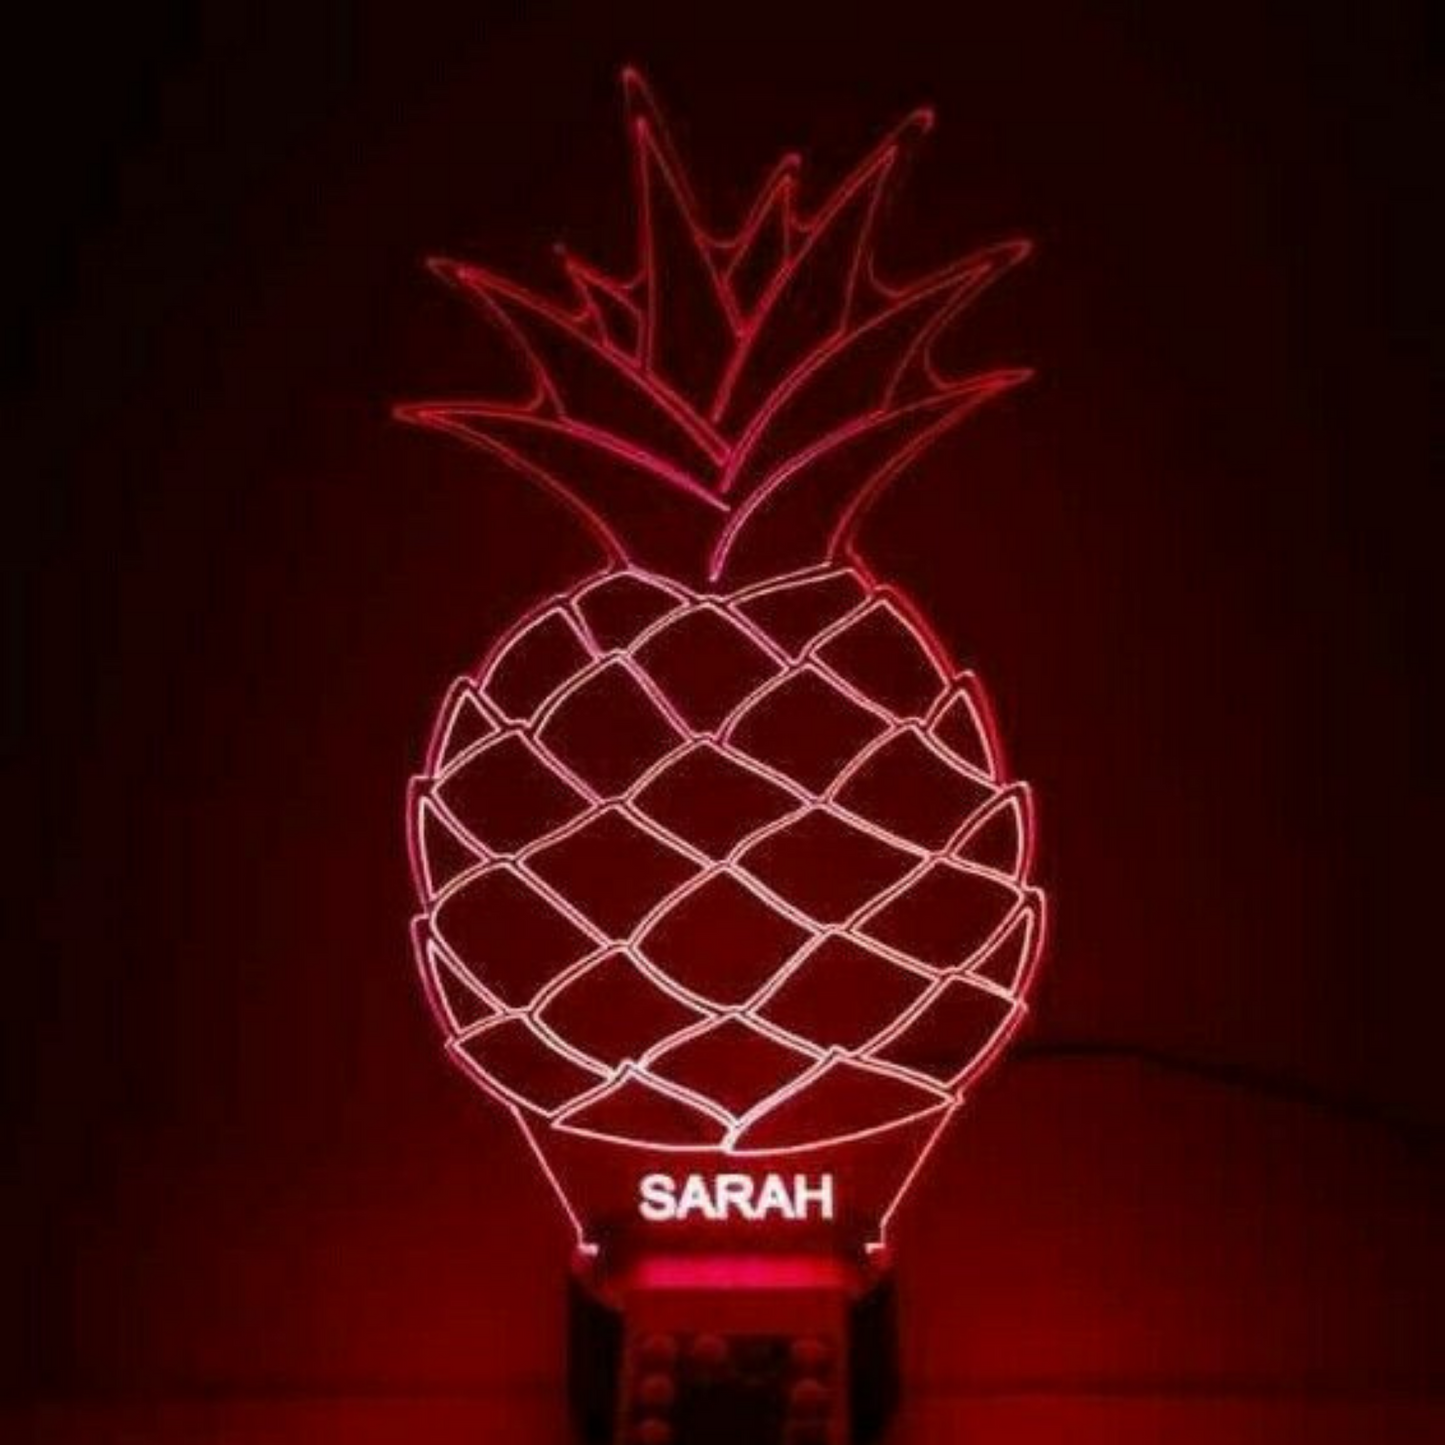 Pineapple Fruit LED Tabletop Night Light Up Lamp, 16 Color options with Remote